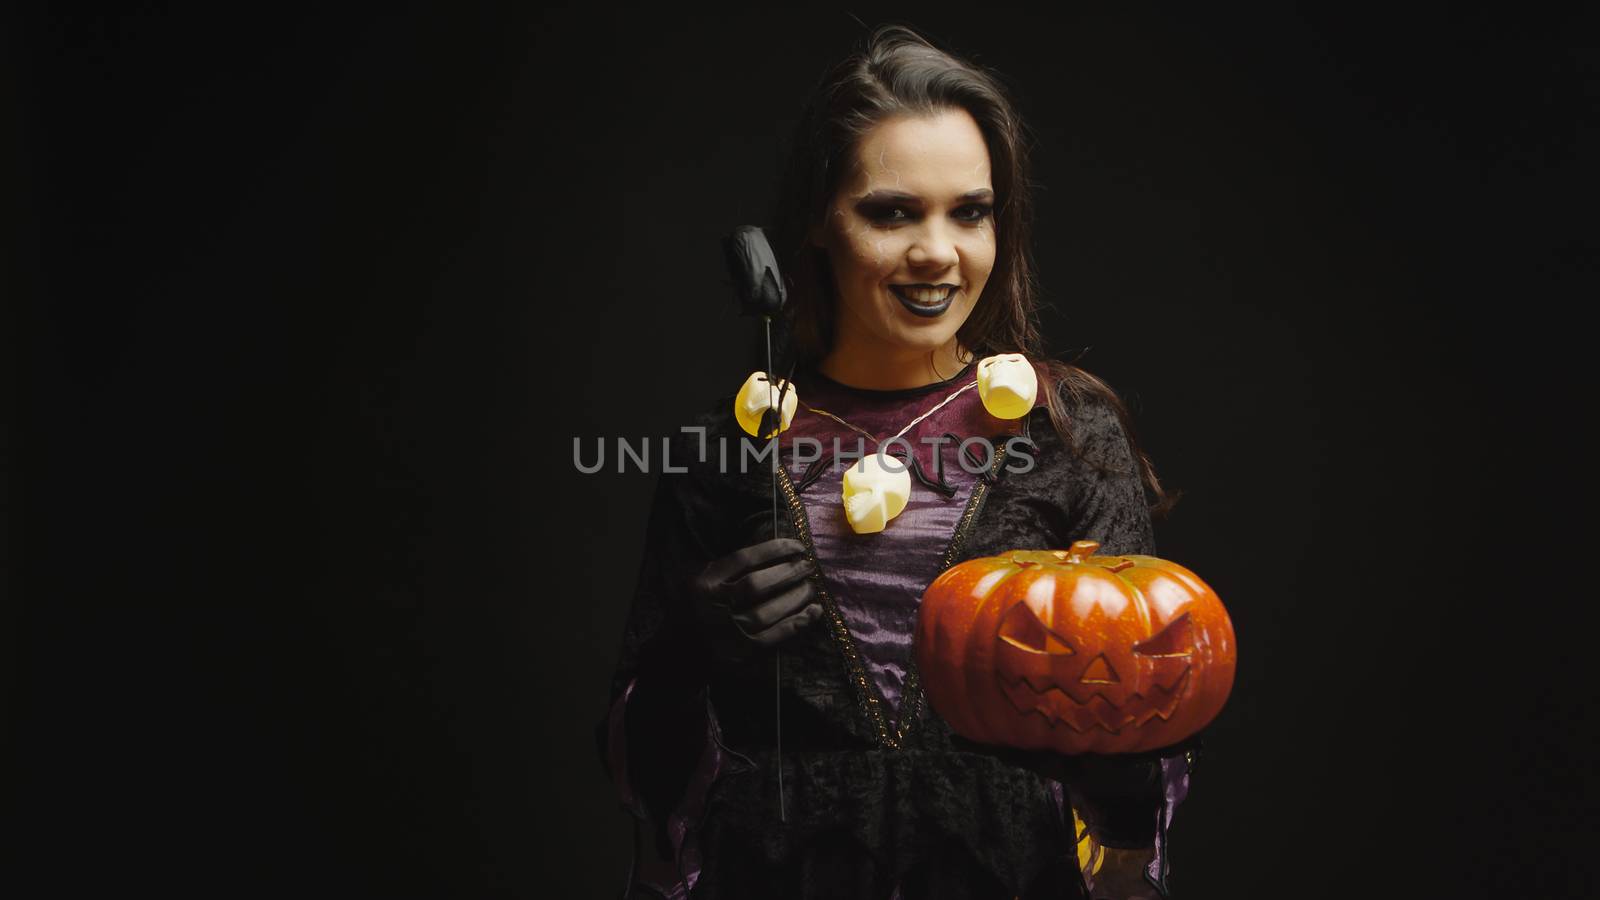 Smiling witch dressed up for halloween holding pumpkin over black background.